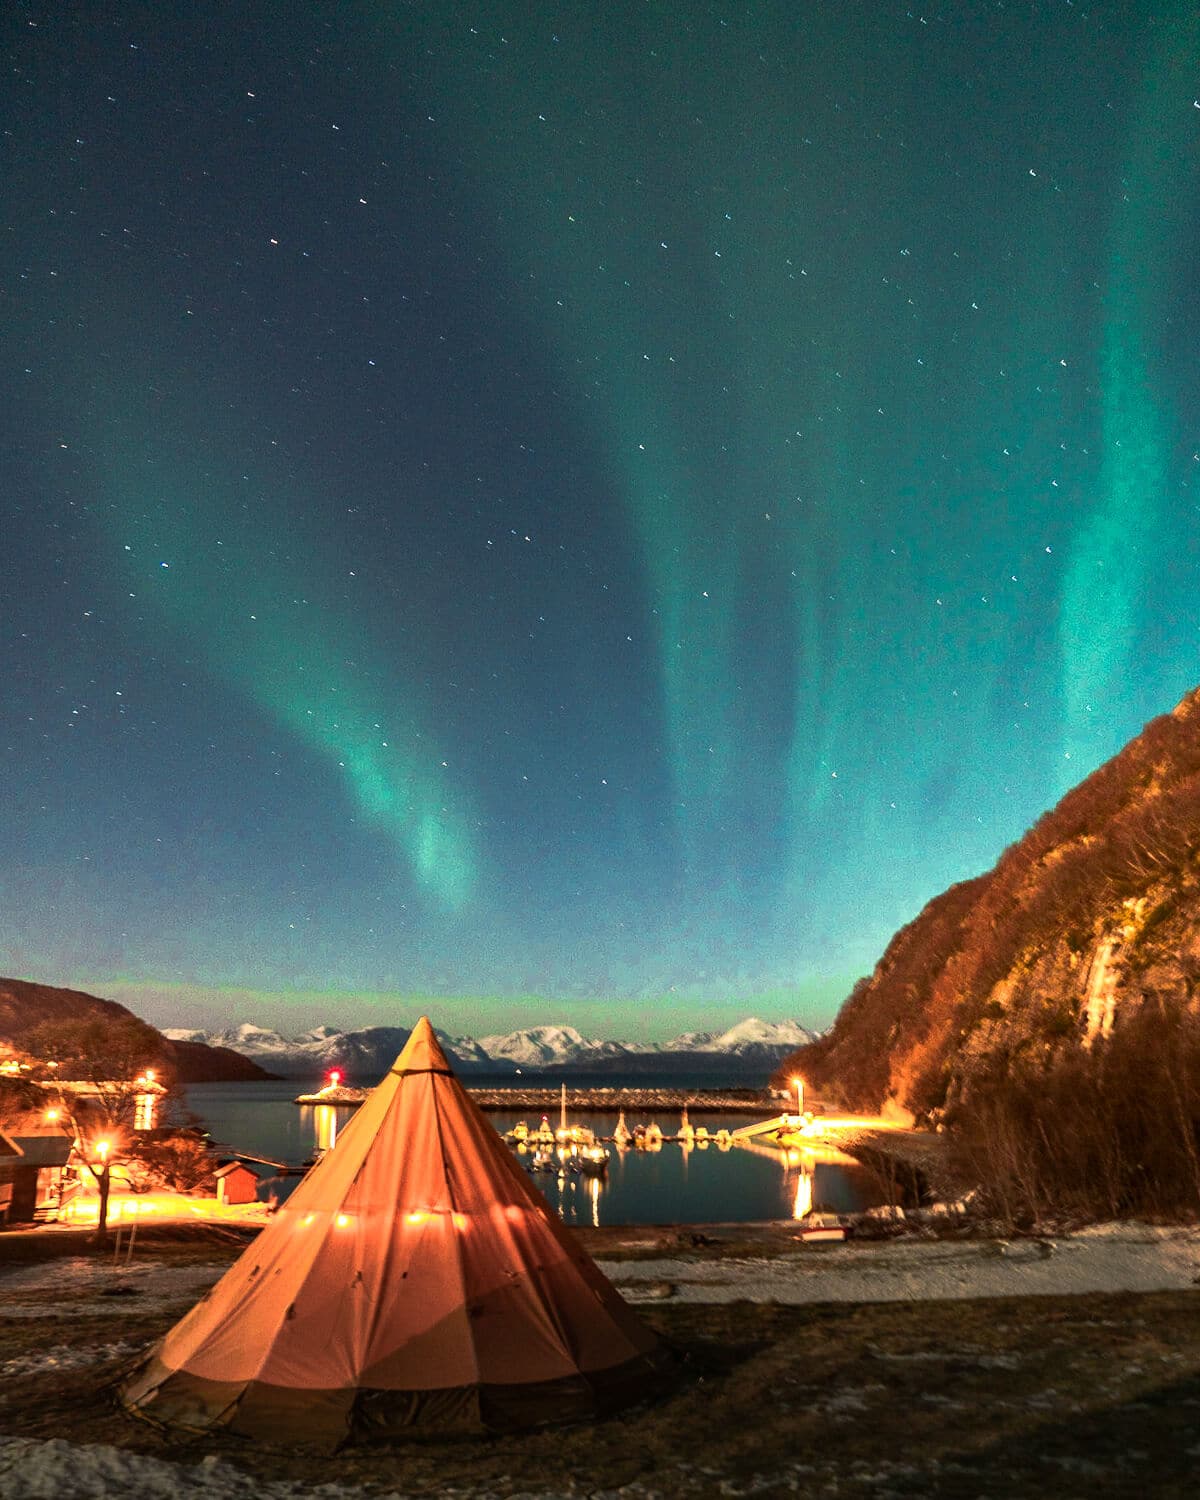 bryder daggry betalingsmiddel Finde sig i The Absolute Best Time to See the Northern Lights in Norway + Helpful Tips  - Live Like It's the Weekend